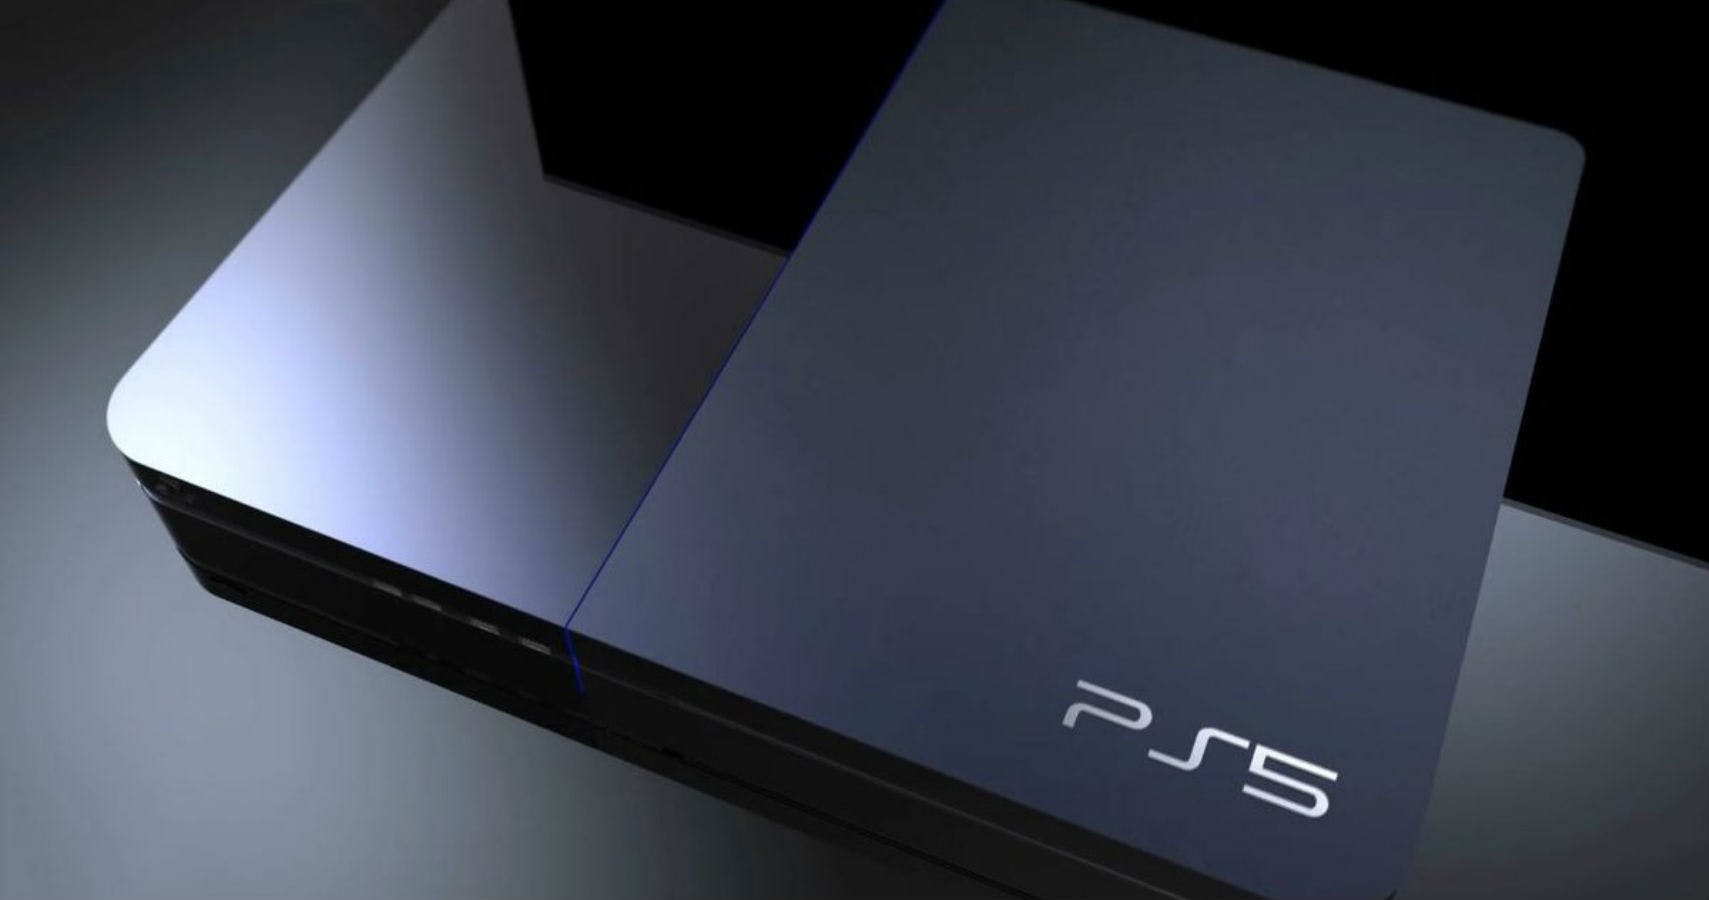 How Close were we about PS5 Details?